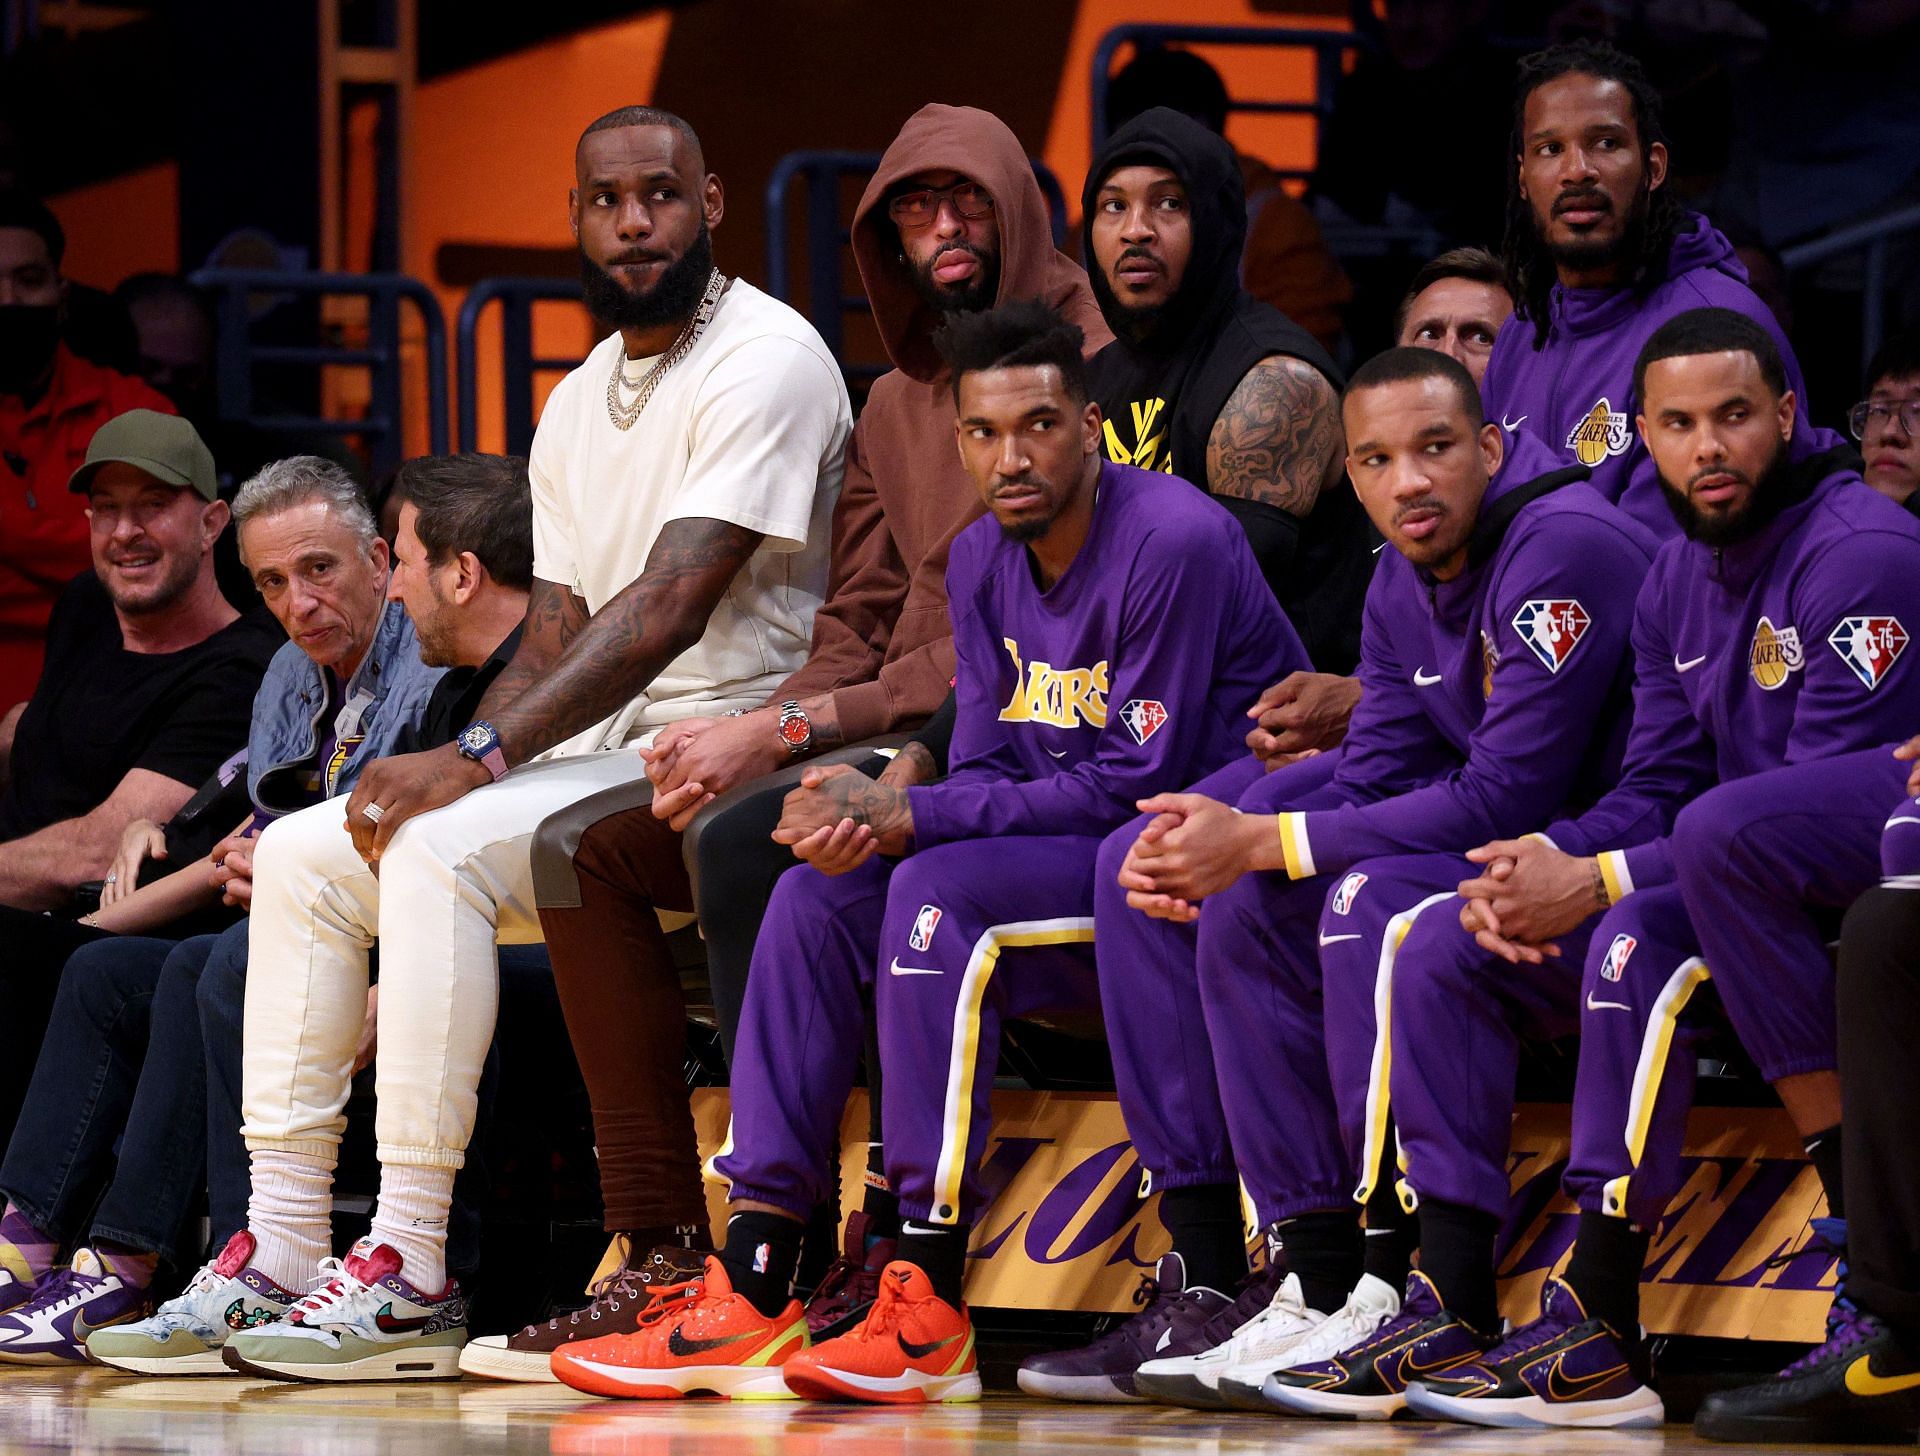 LeBron James, Anthony Davis and Carmelo Anthony of the LA Lakers on the bench